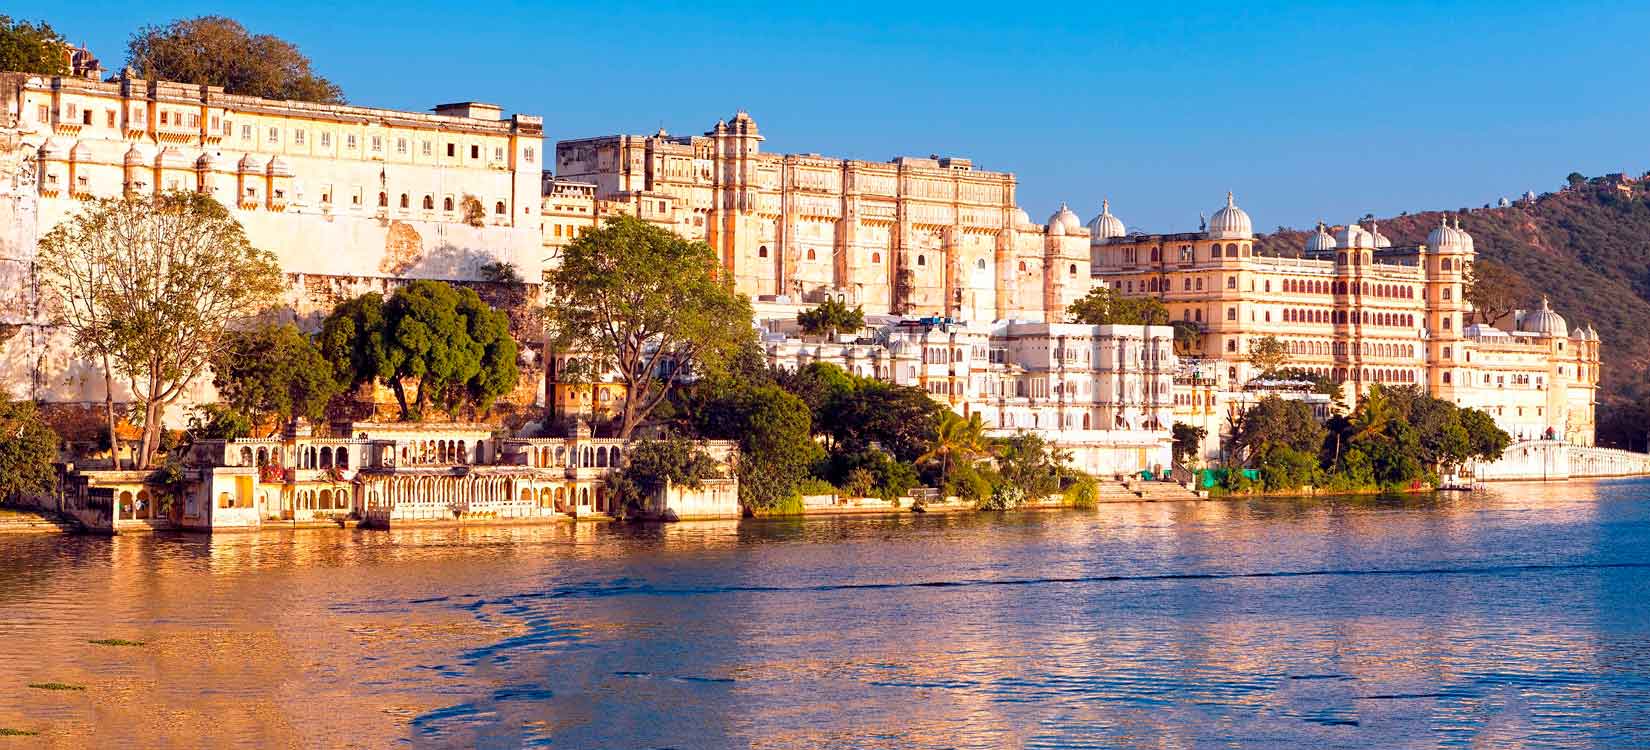 Udaipur- The City of Lakes - Tour